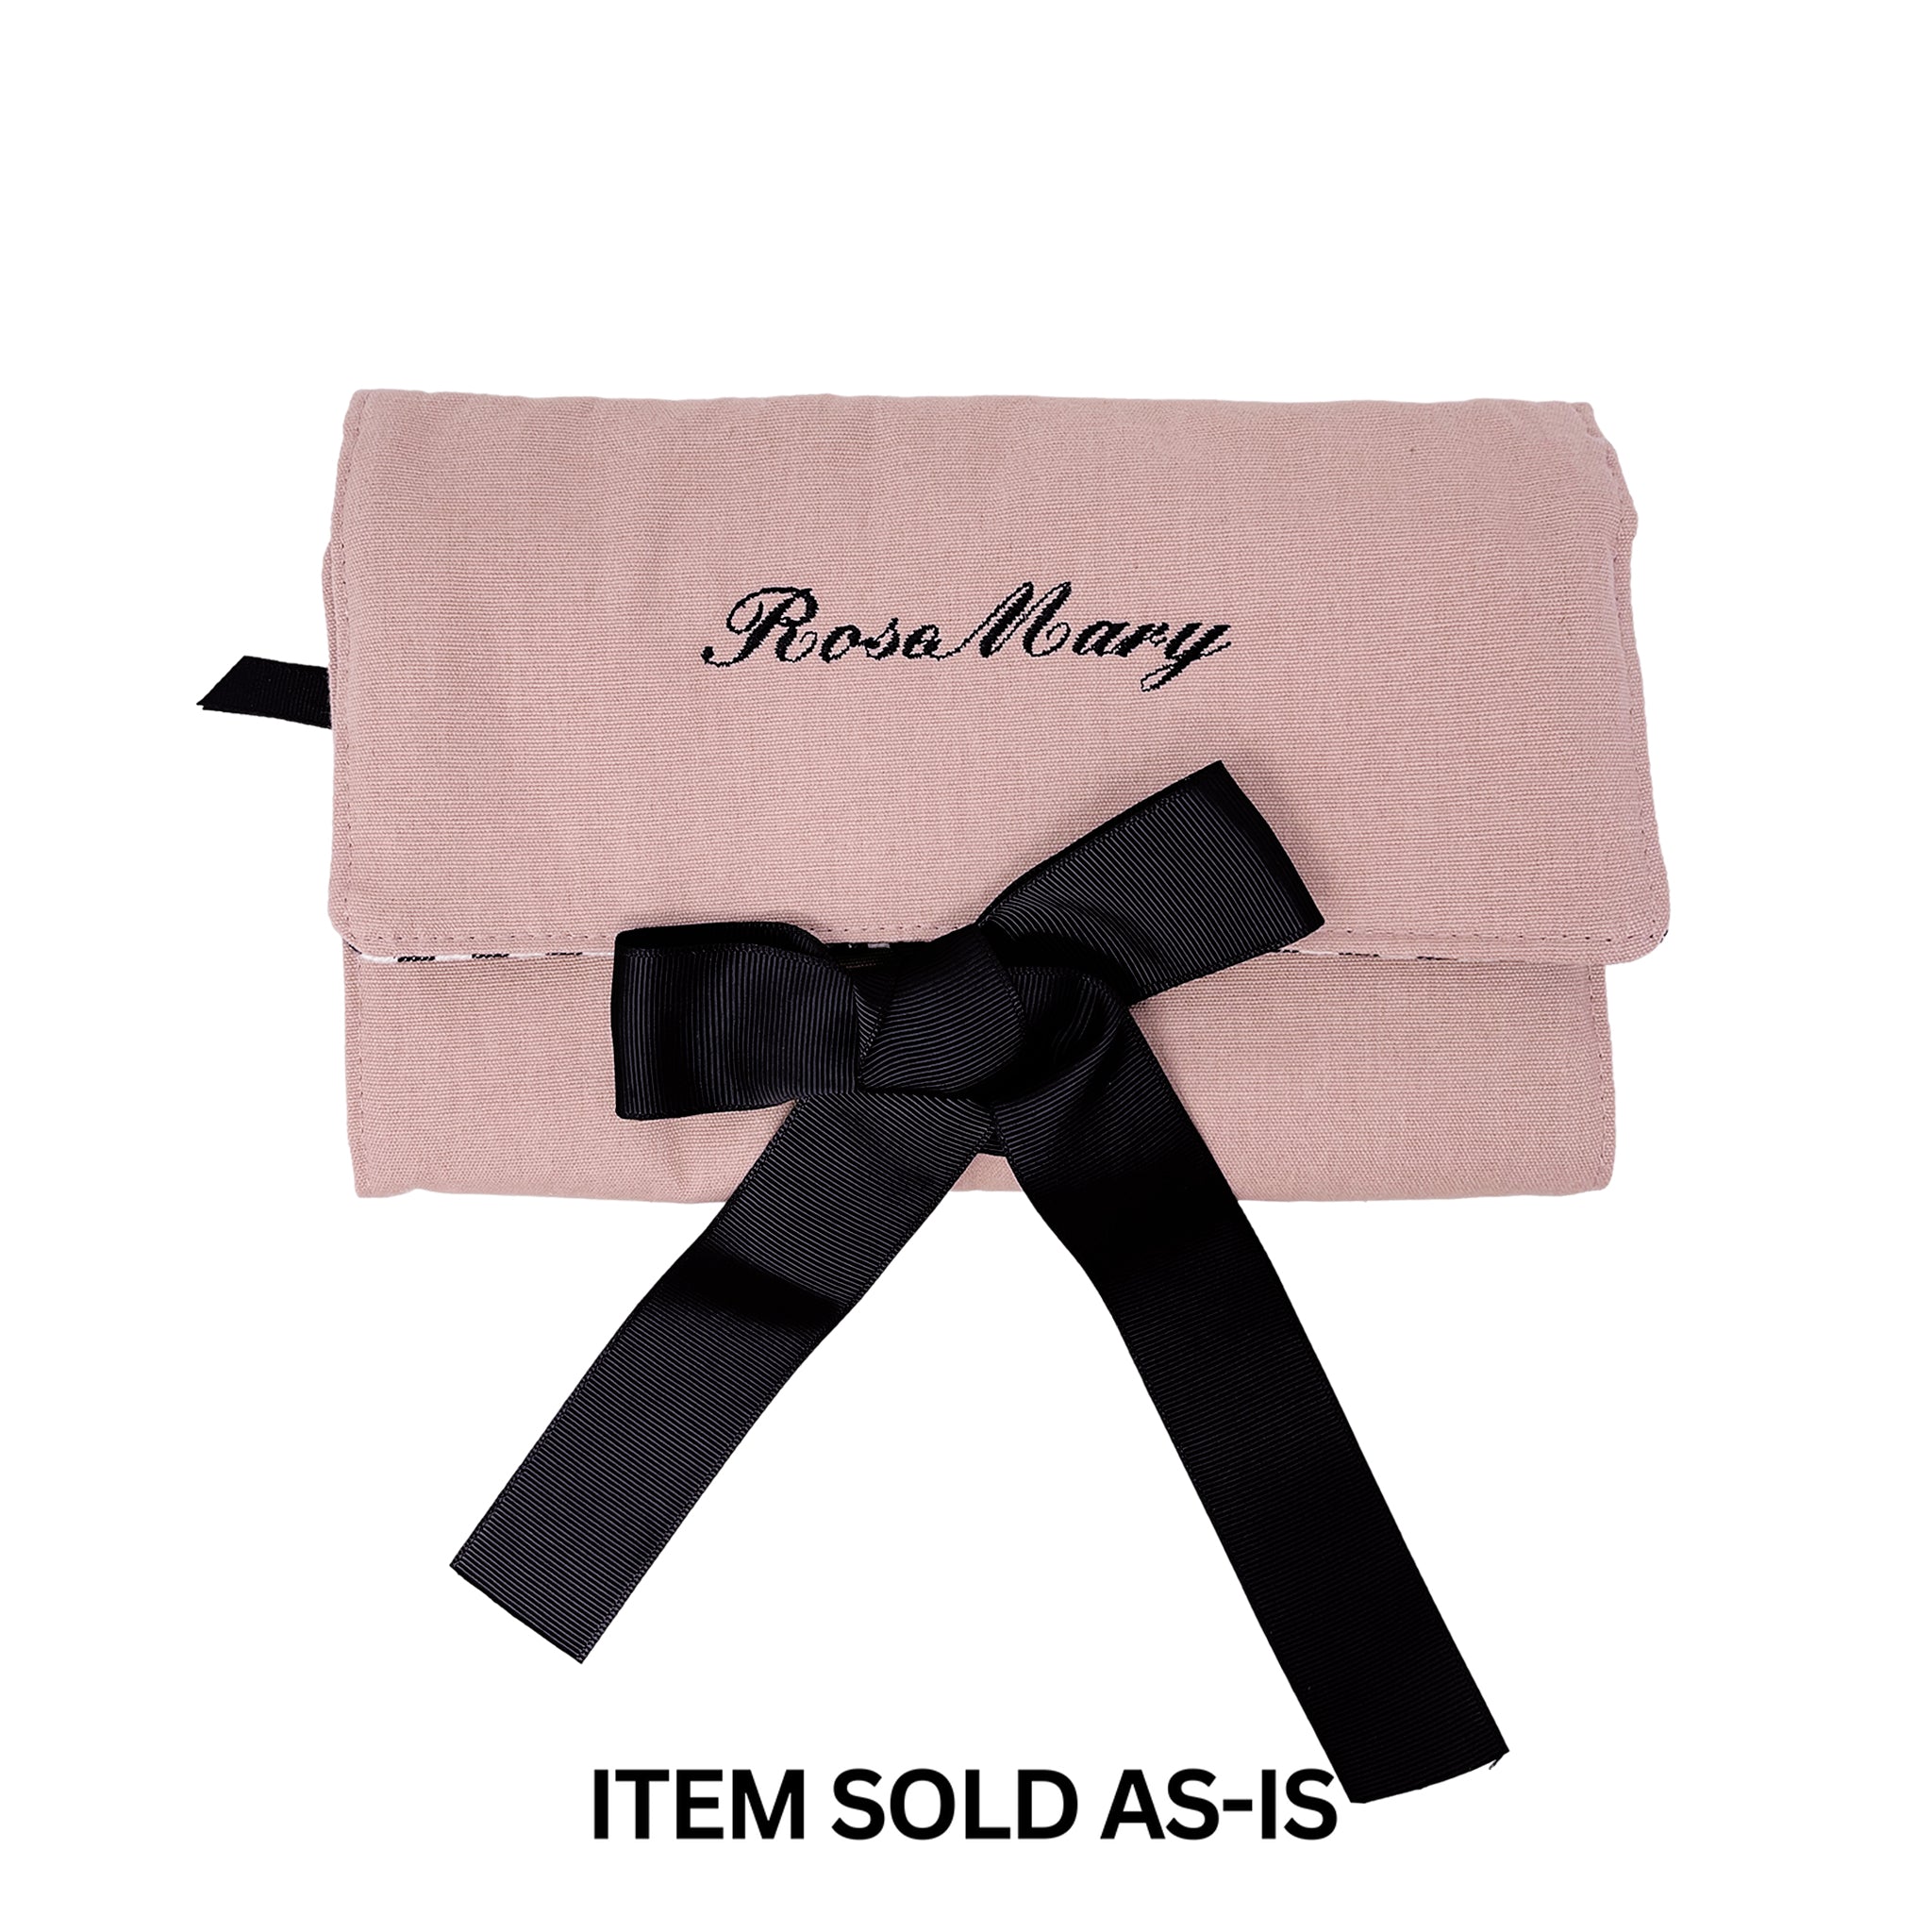 SALES BIN - Large Jewelry Roll, Travel Pouch, Pink/Blush | Bag-all